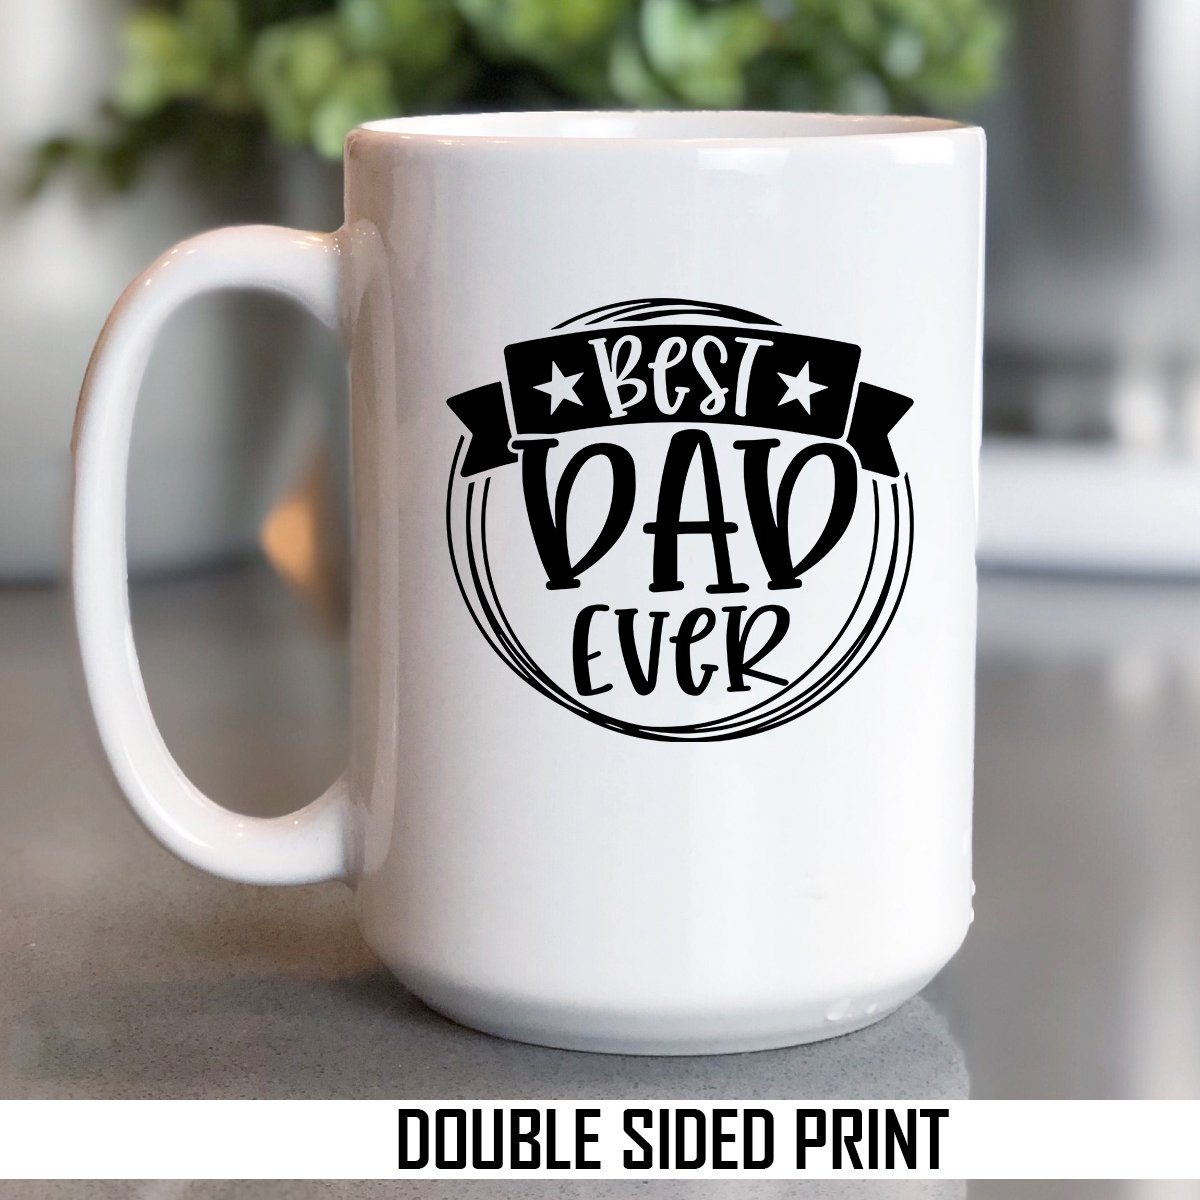 Best Dad Ever Double Sided Printed Mug